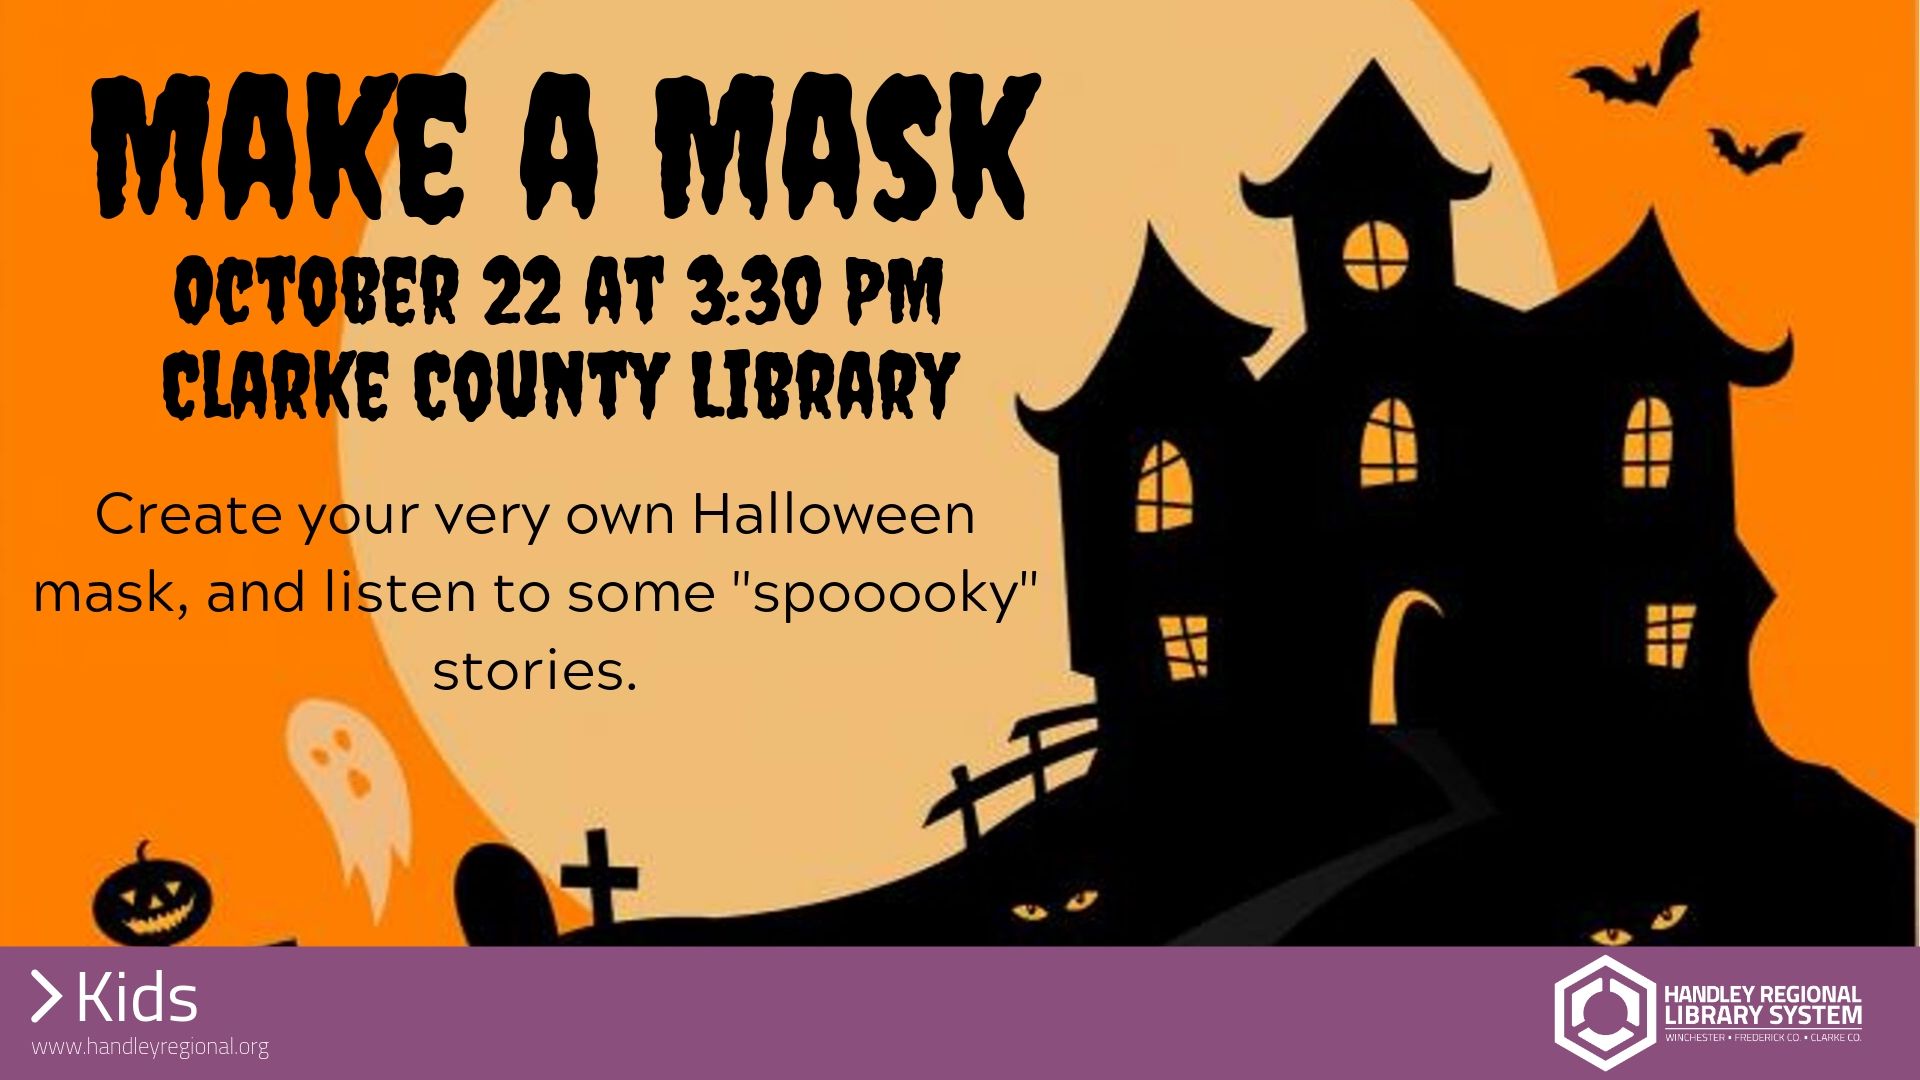 haunted house with bats and pumpkins around with make a mask event info